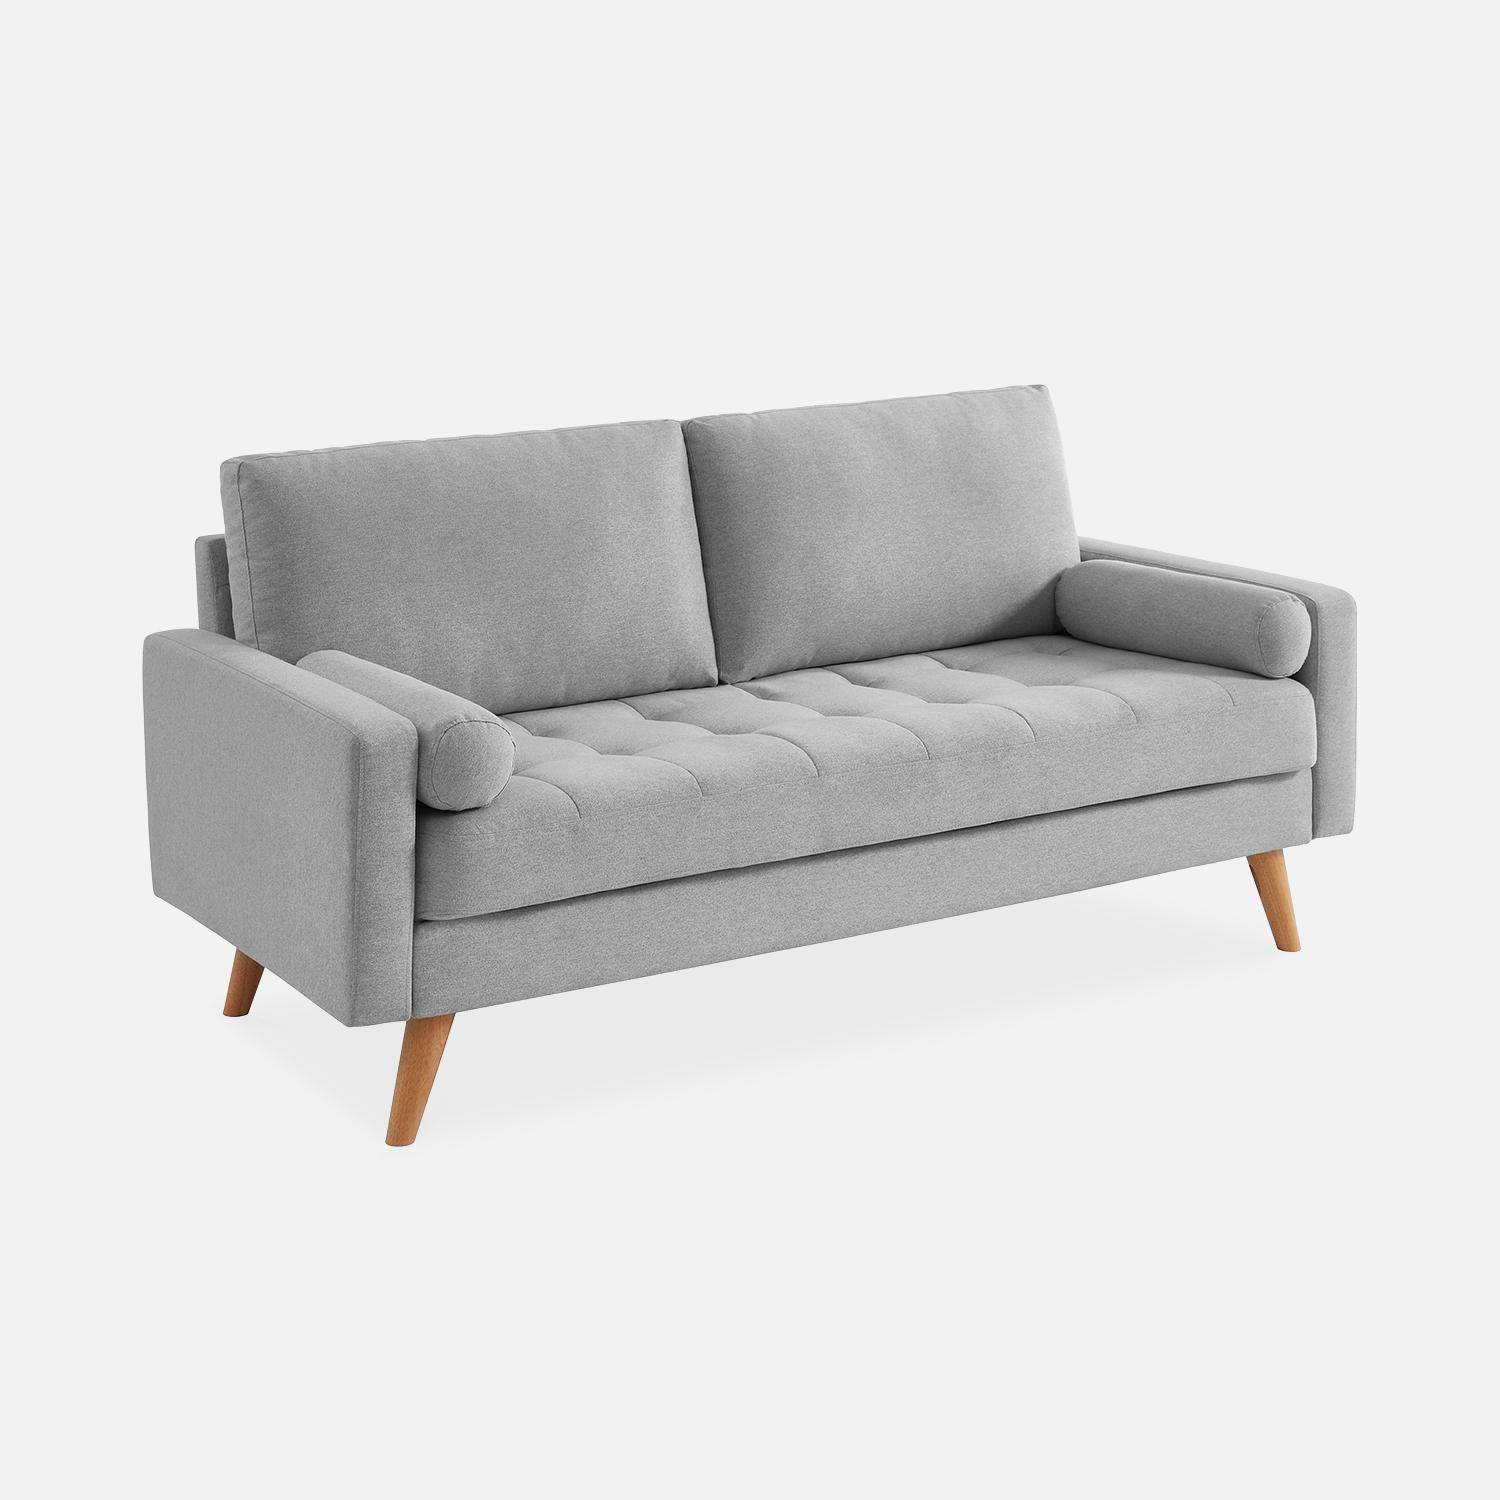 3-seater sofa with Scandi style wooden legs - Ivar - Grey Photo3